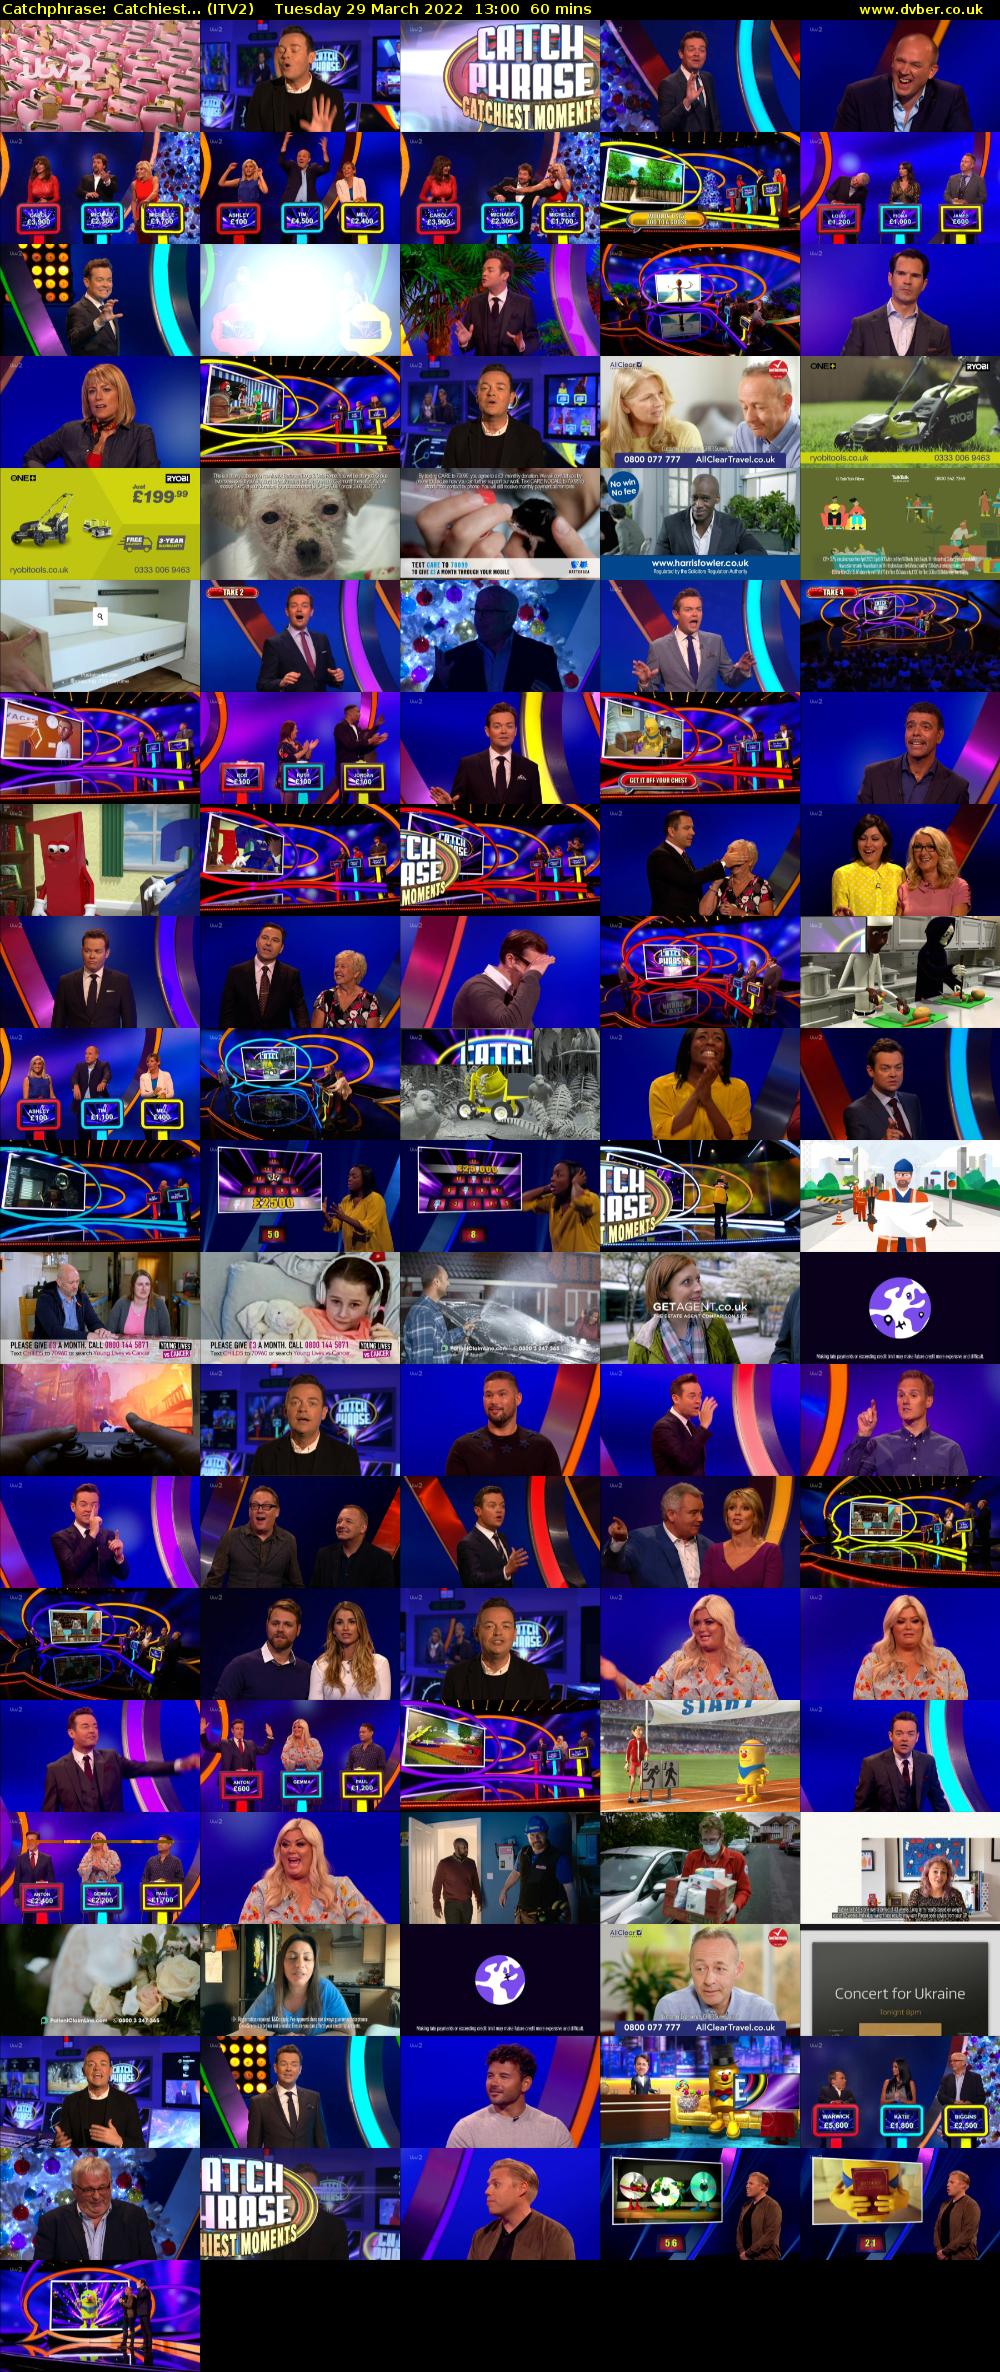 Catchphrase: Catchiest... (ITV2) Tuesday 29 March 2022 13:00 - 14:00